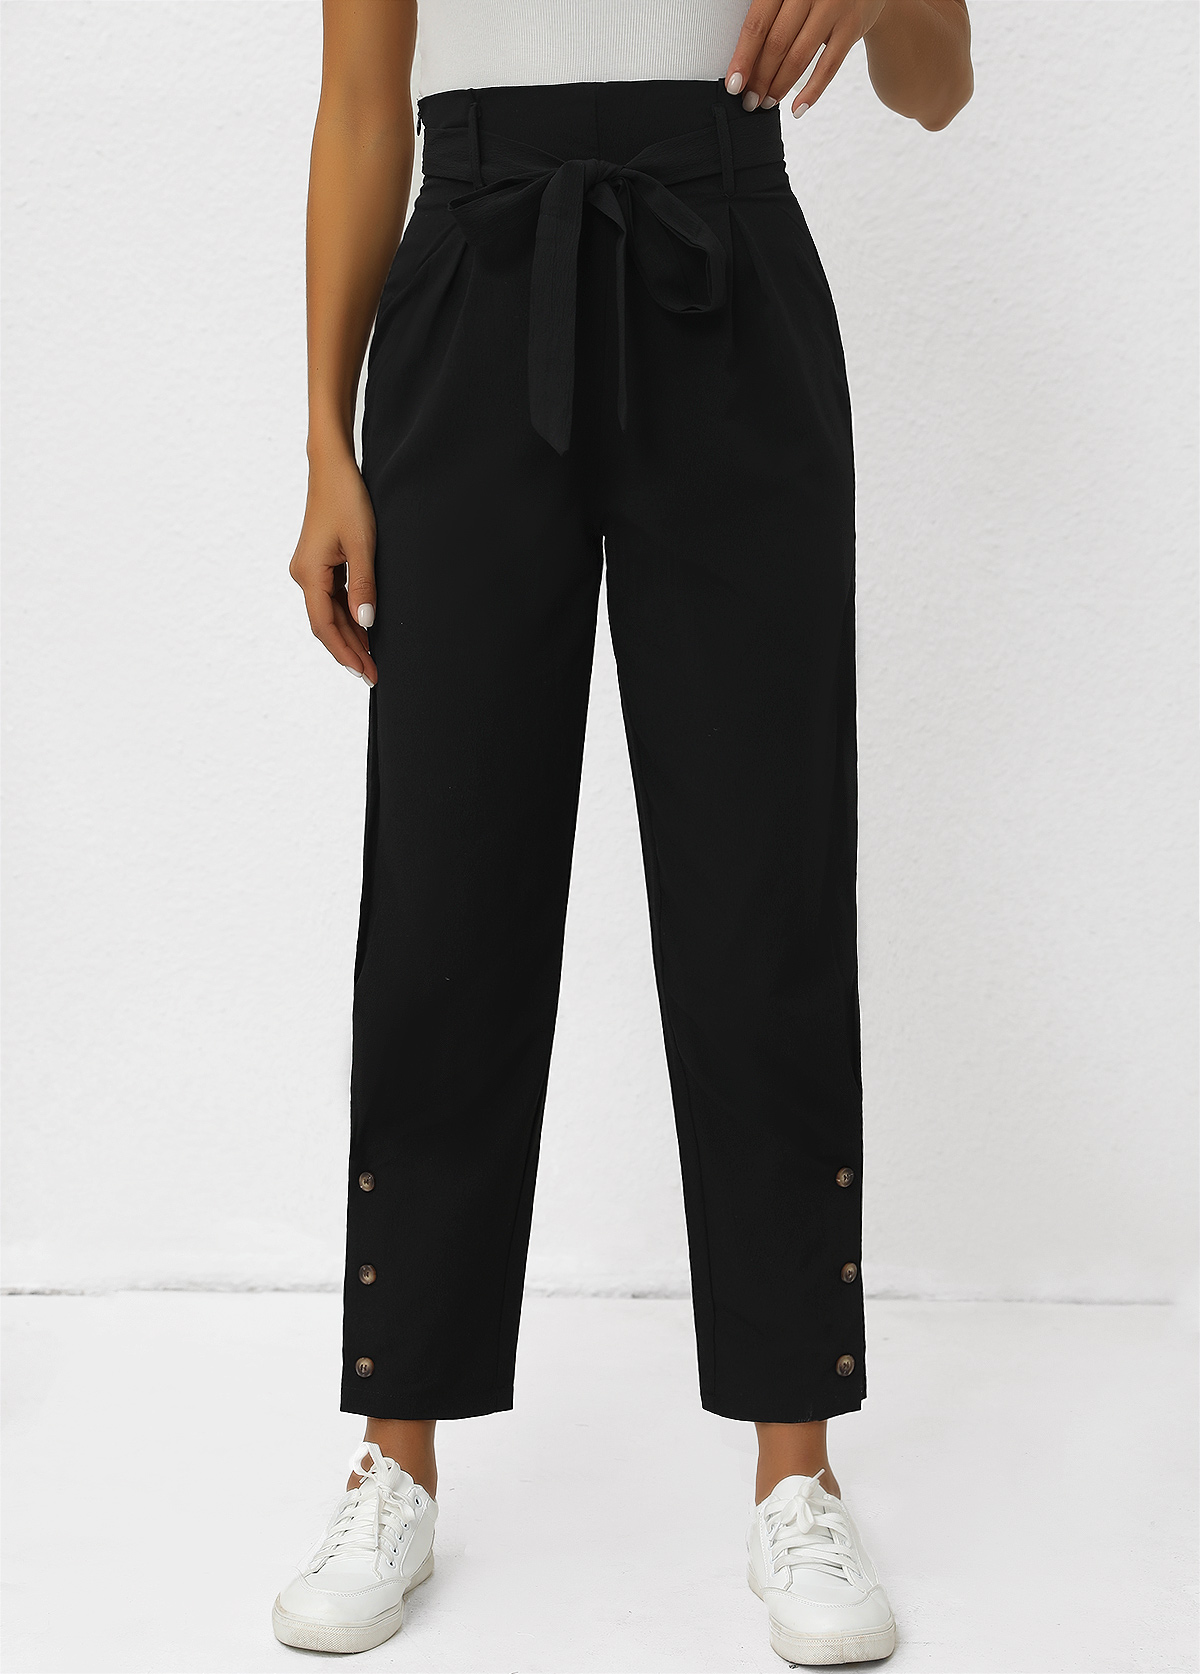 Button Black Belted Zipper Fly High Waisted Pants